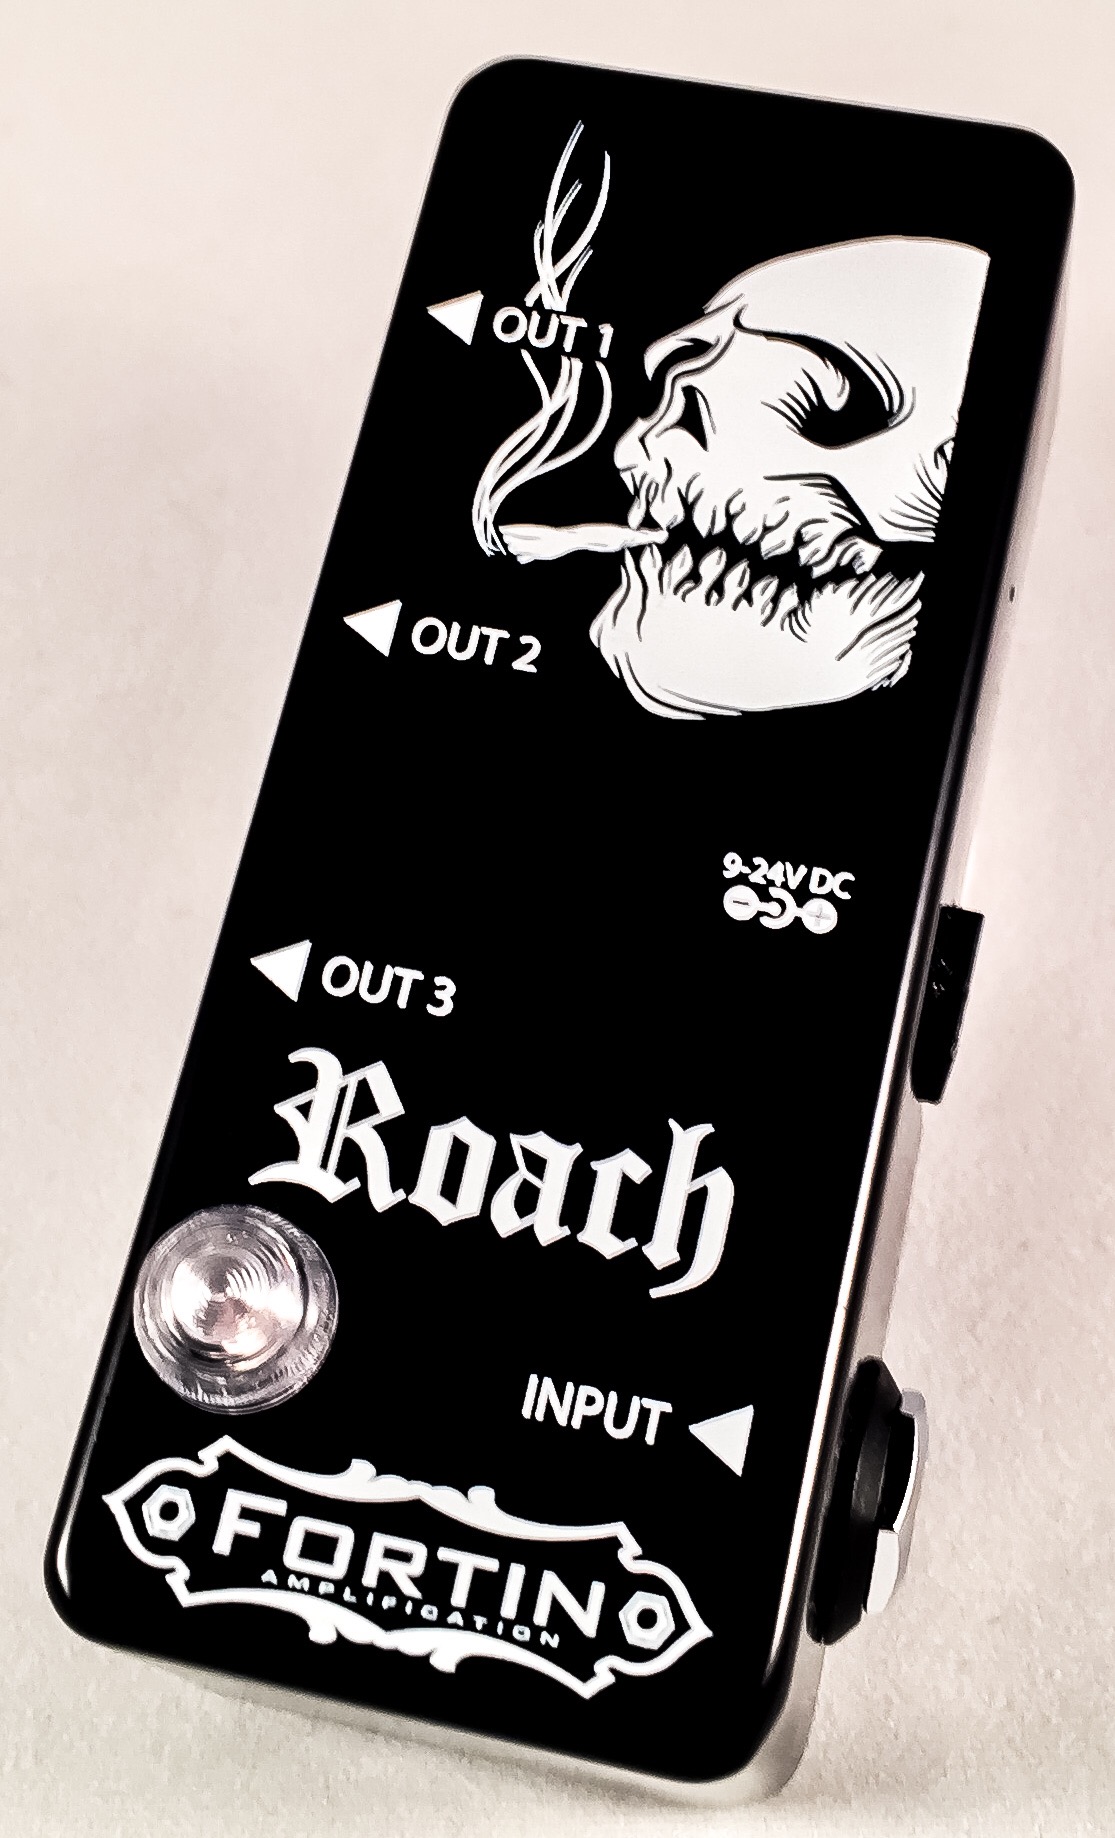 Fortin Amps Roach 3-way Splitter - Footswitch & Commande Divers - Variation 1